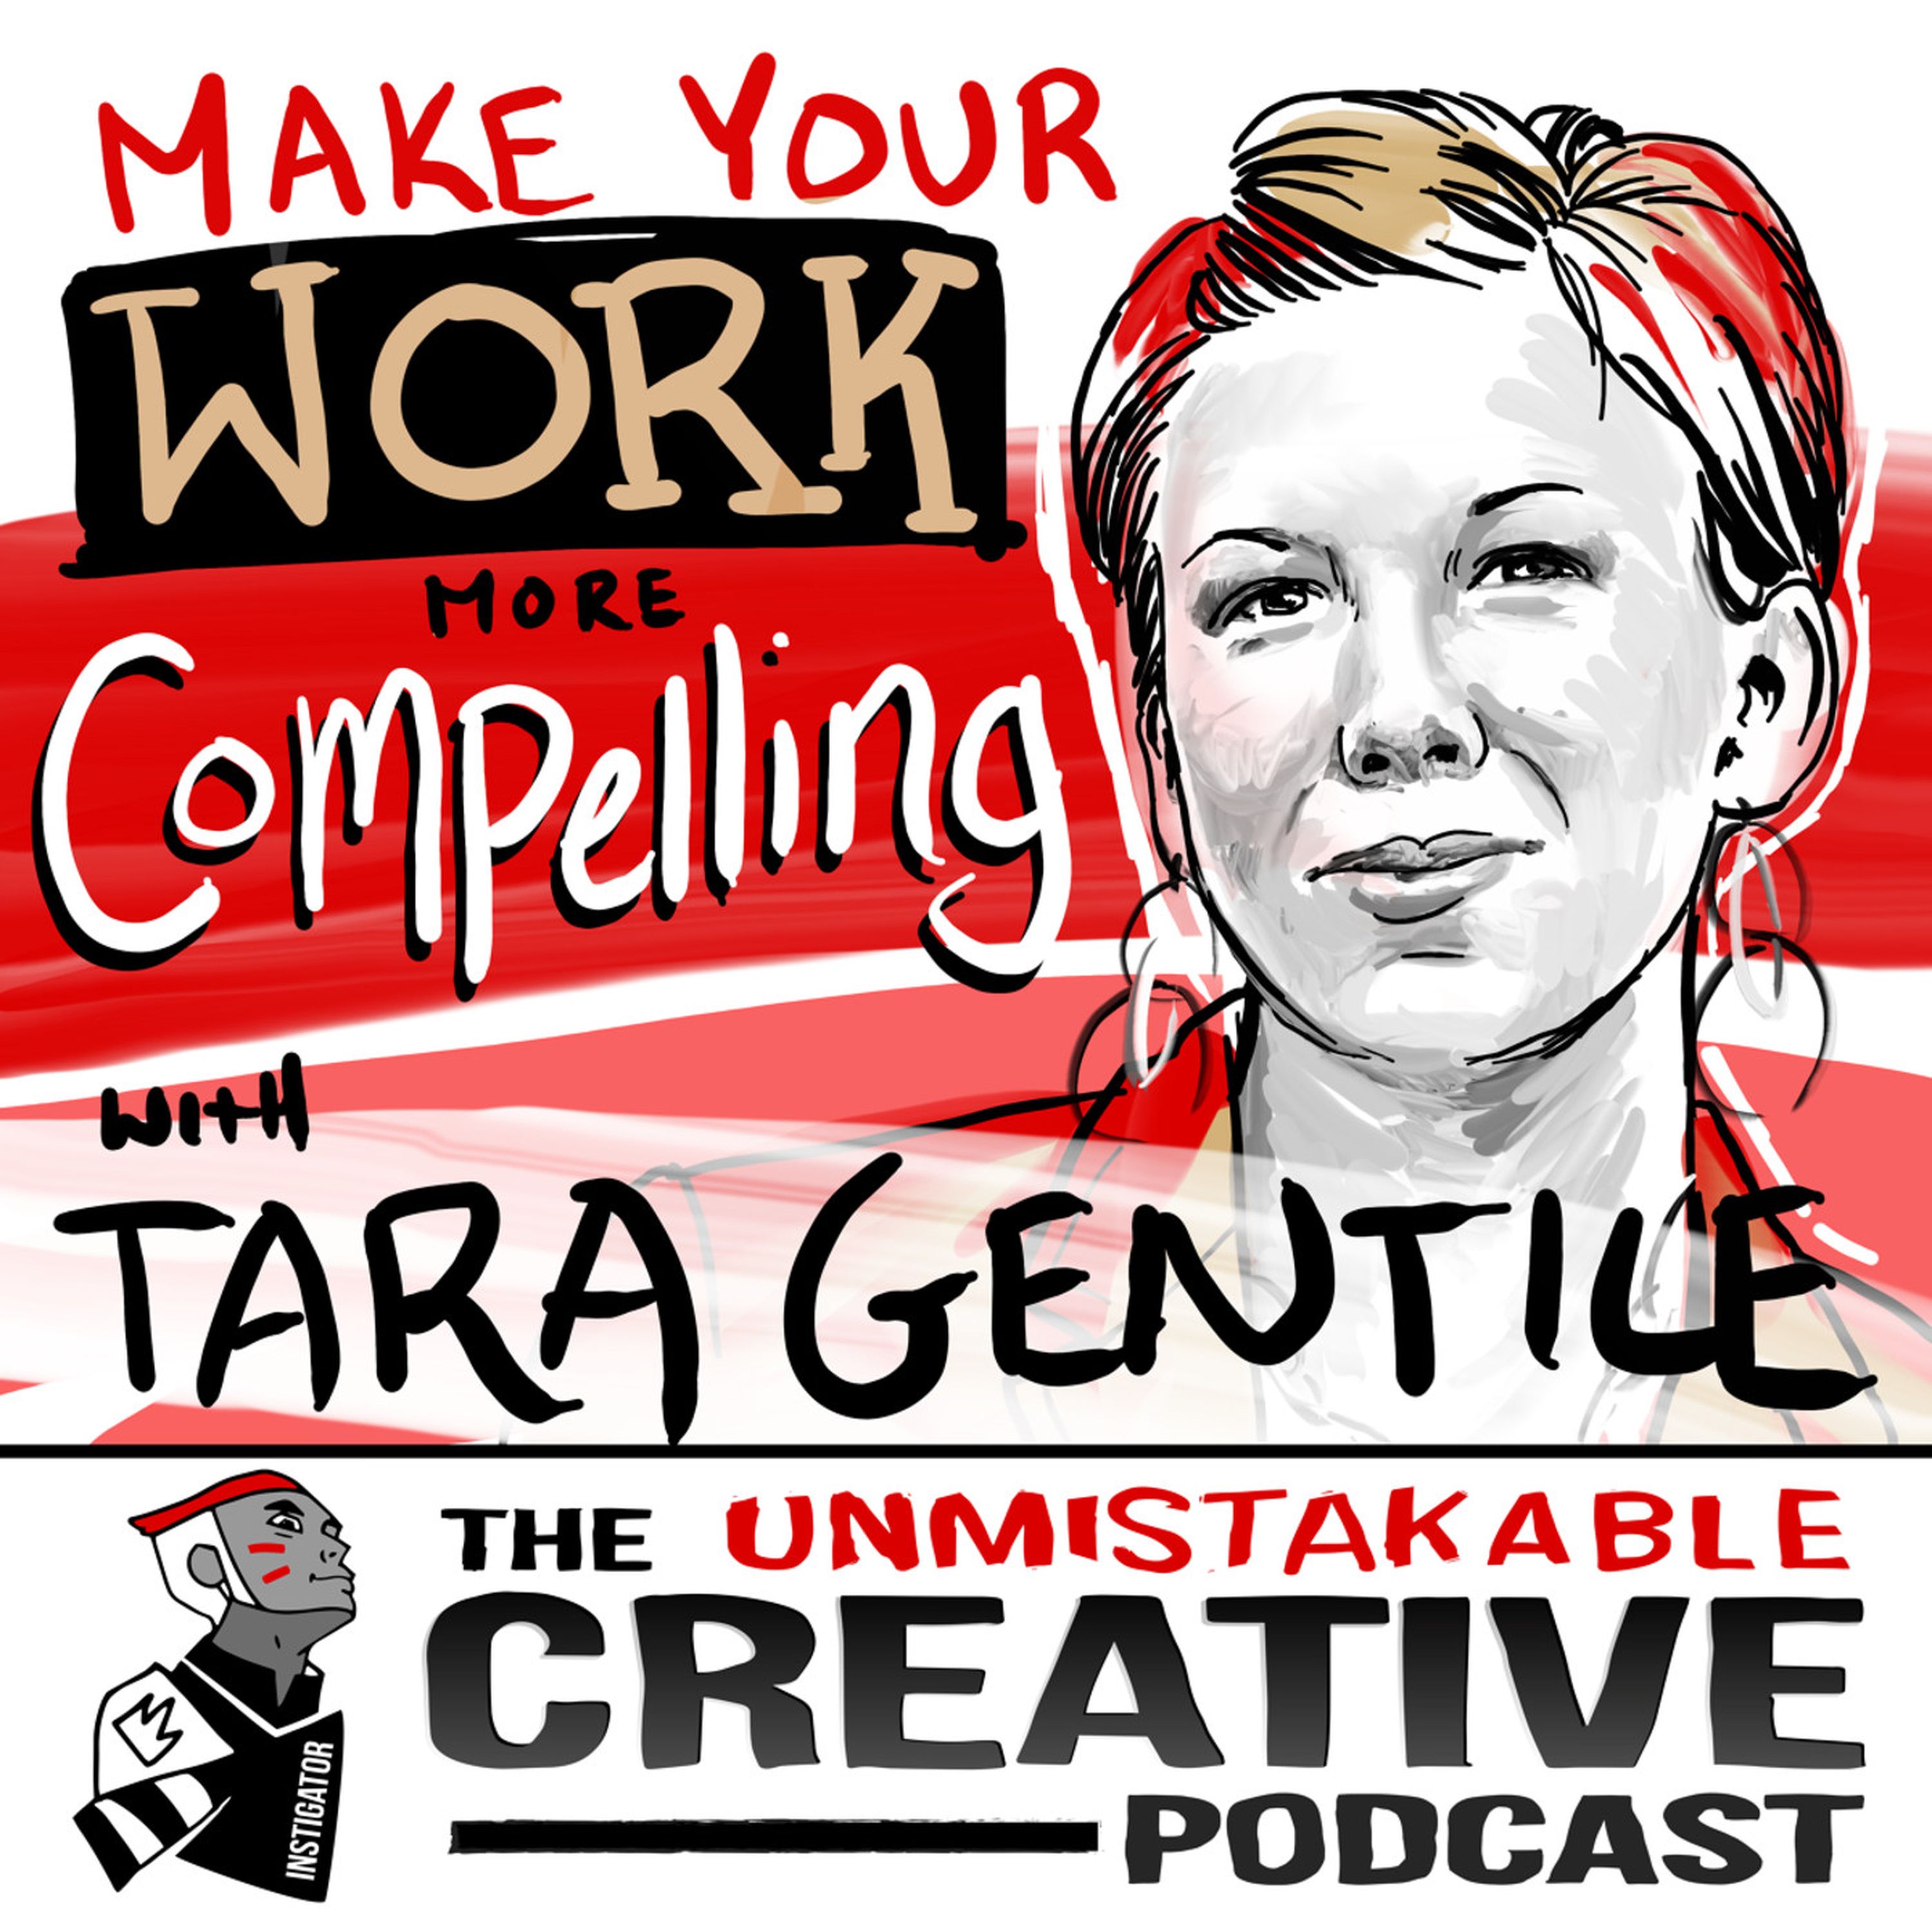 Make Your Work More Compelling with Tara Gentile